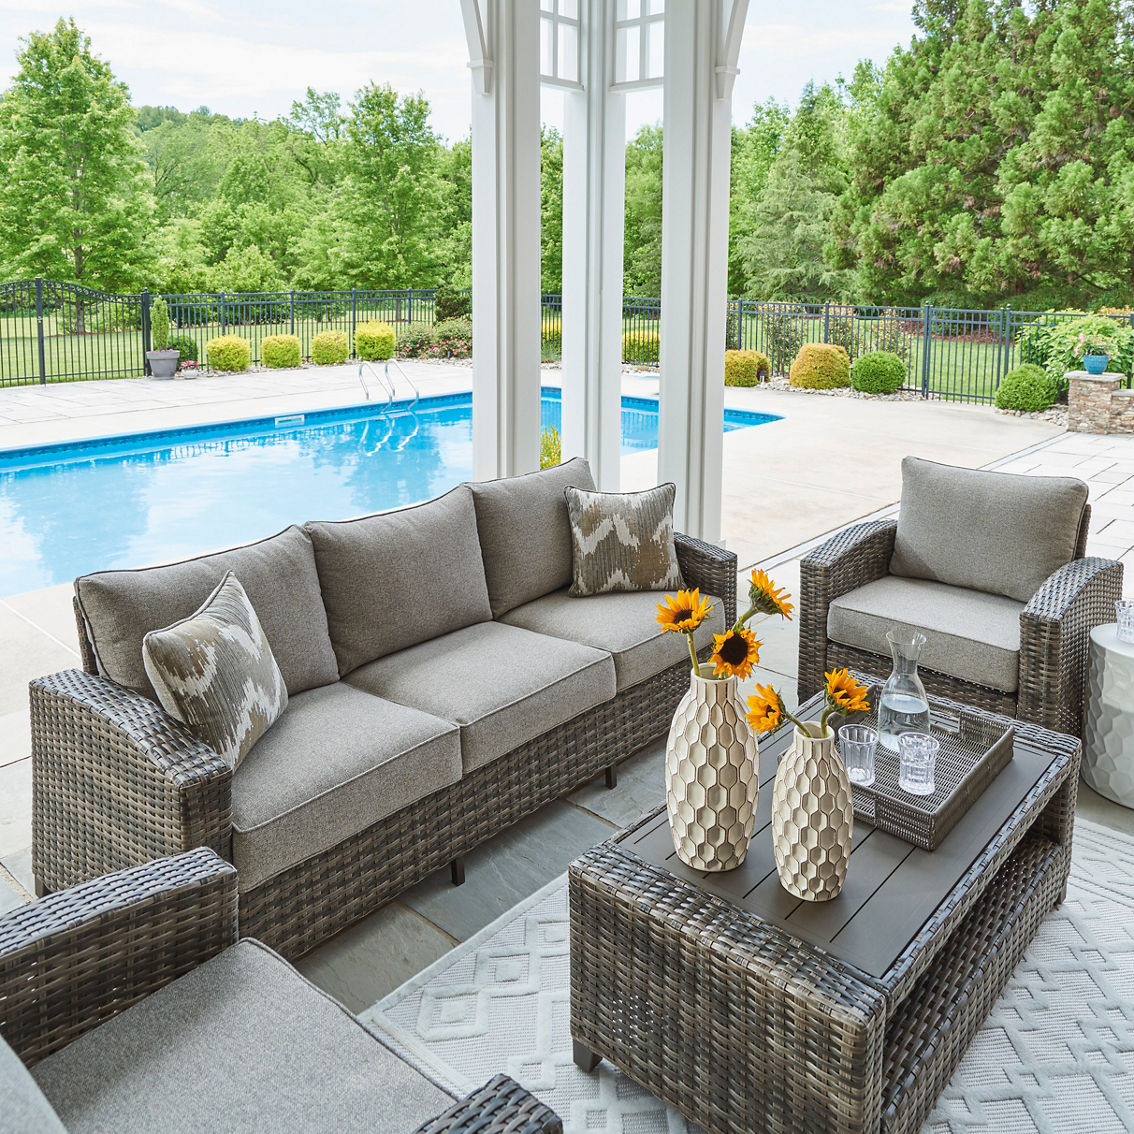 Signature Design by Ashley Oasis Court Outdoor Set 4 pc. - Image 2 of 4